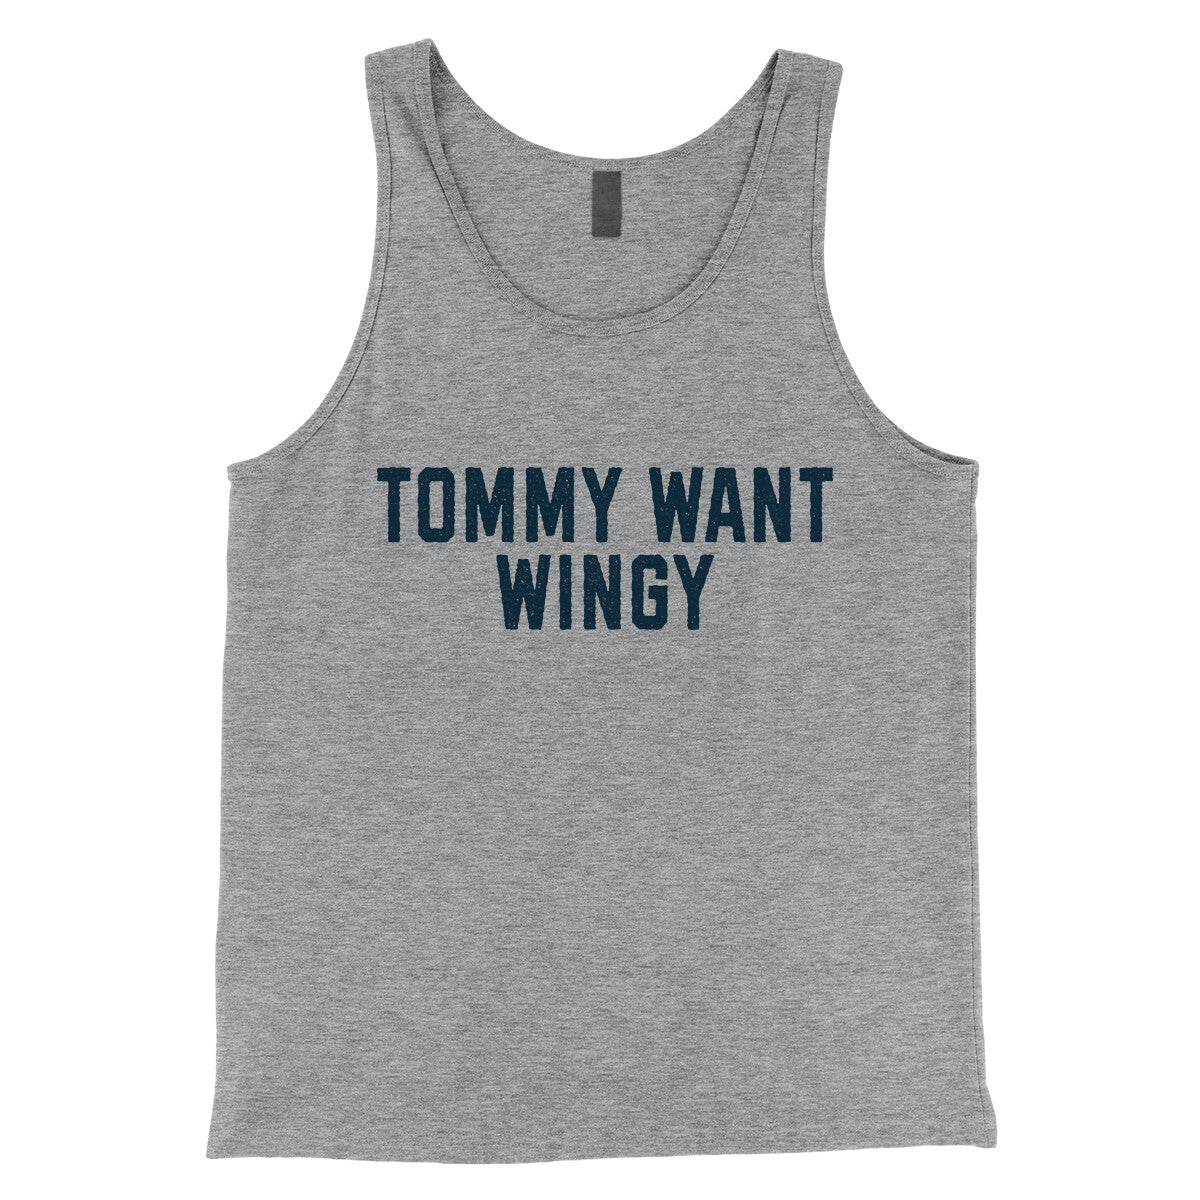 Tommy Want Wingy in Athletic Heather Color